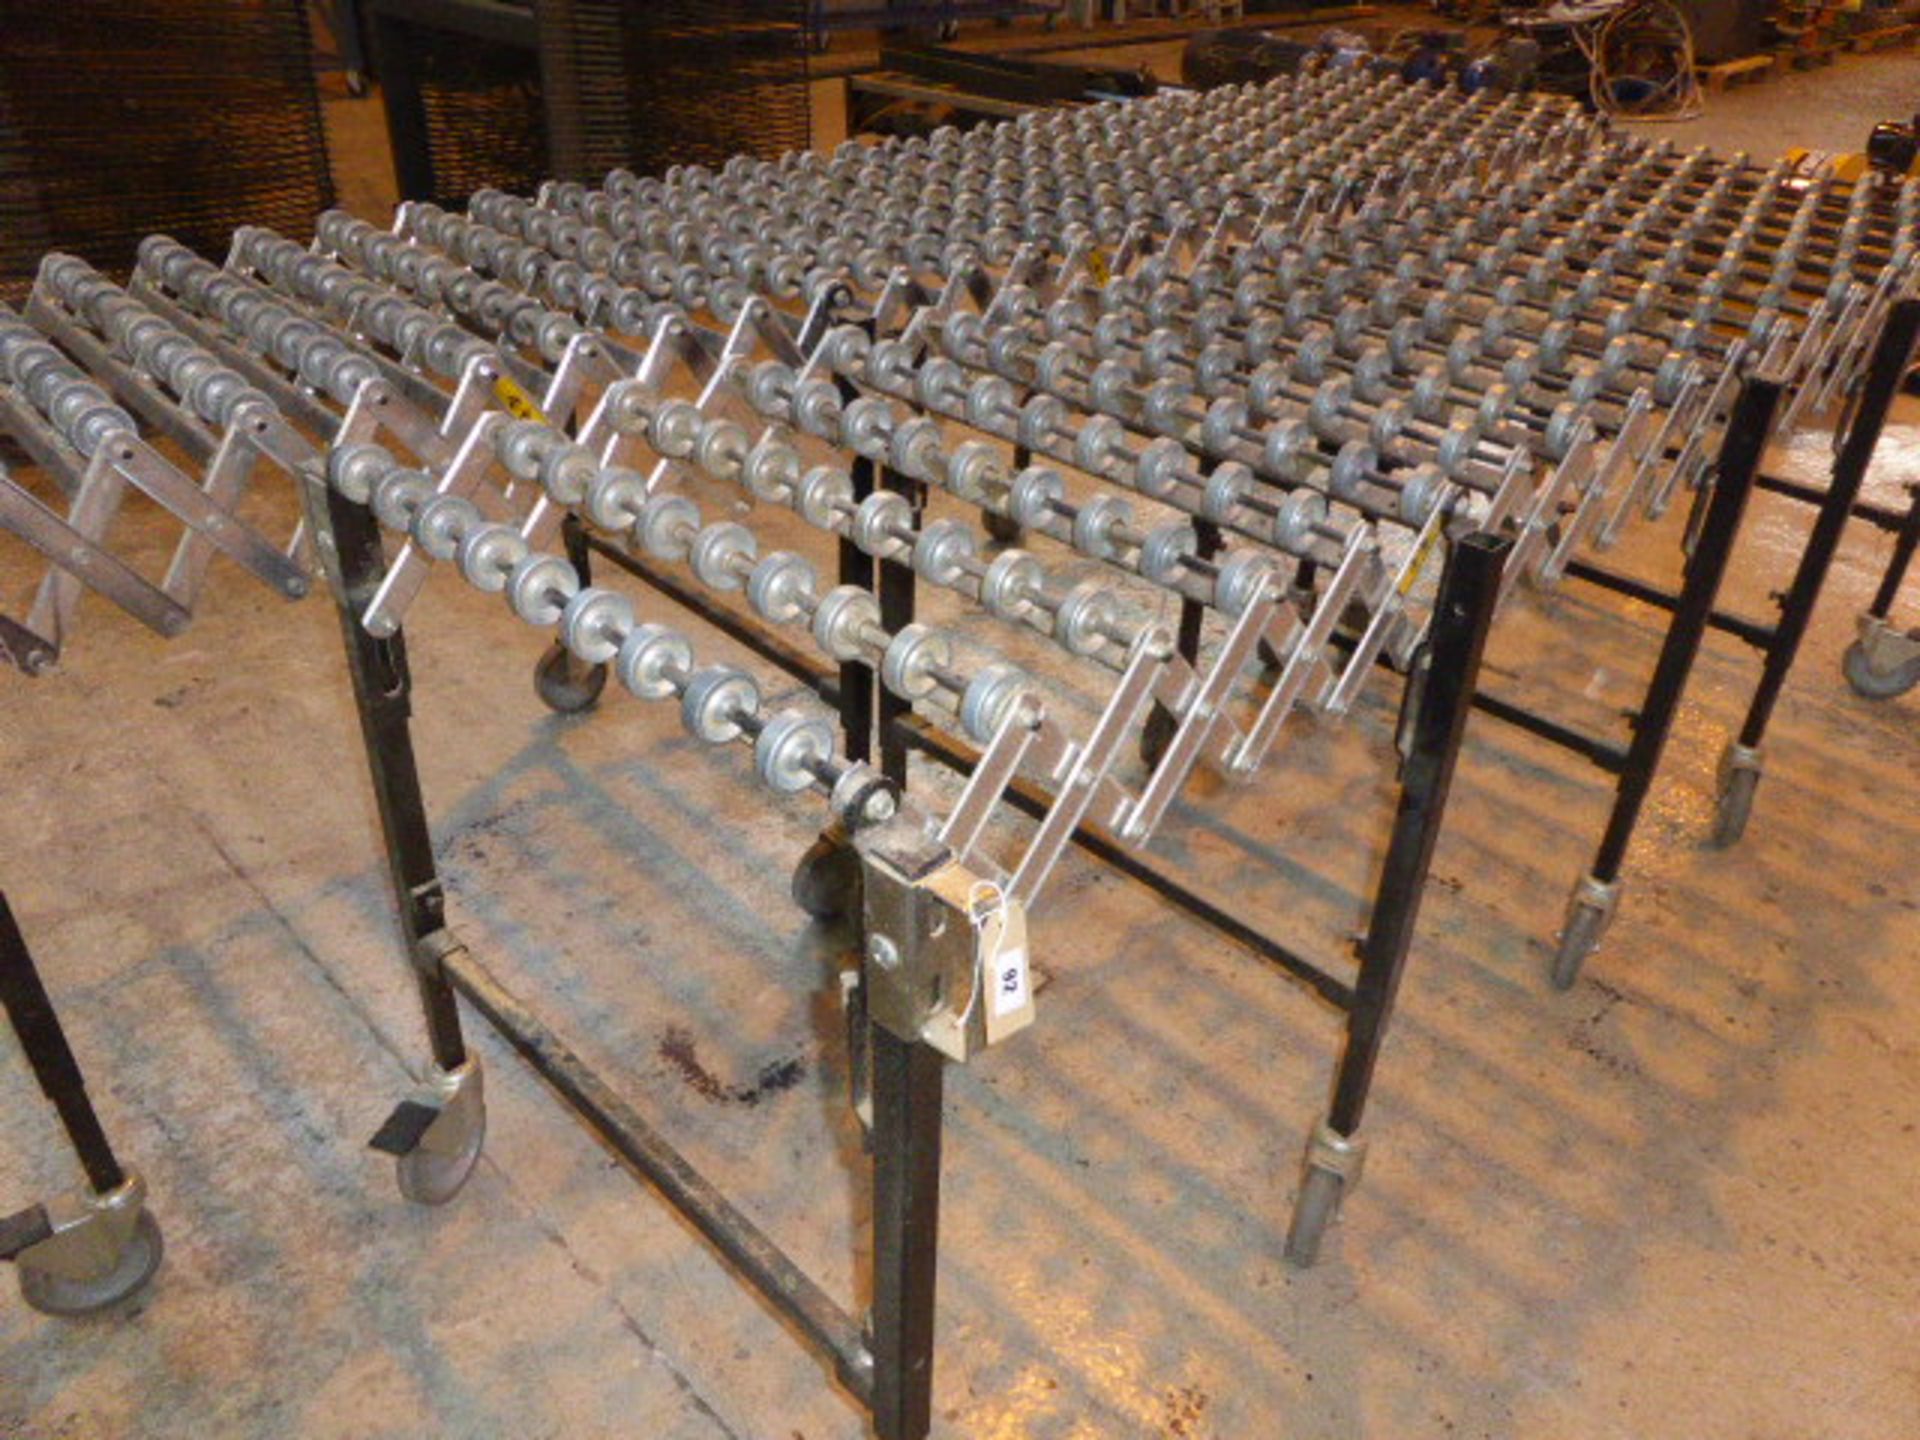 2 sections of expandable roller conveyor on castors - Image 2 of 2